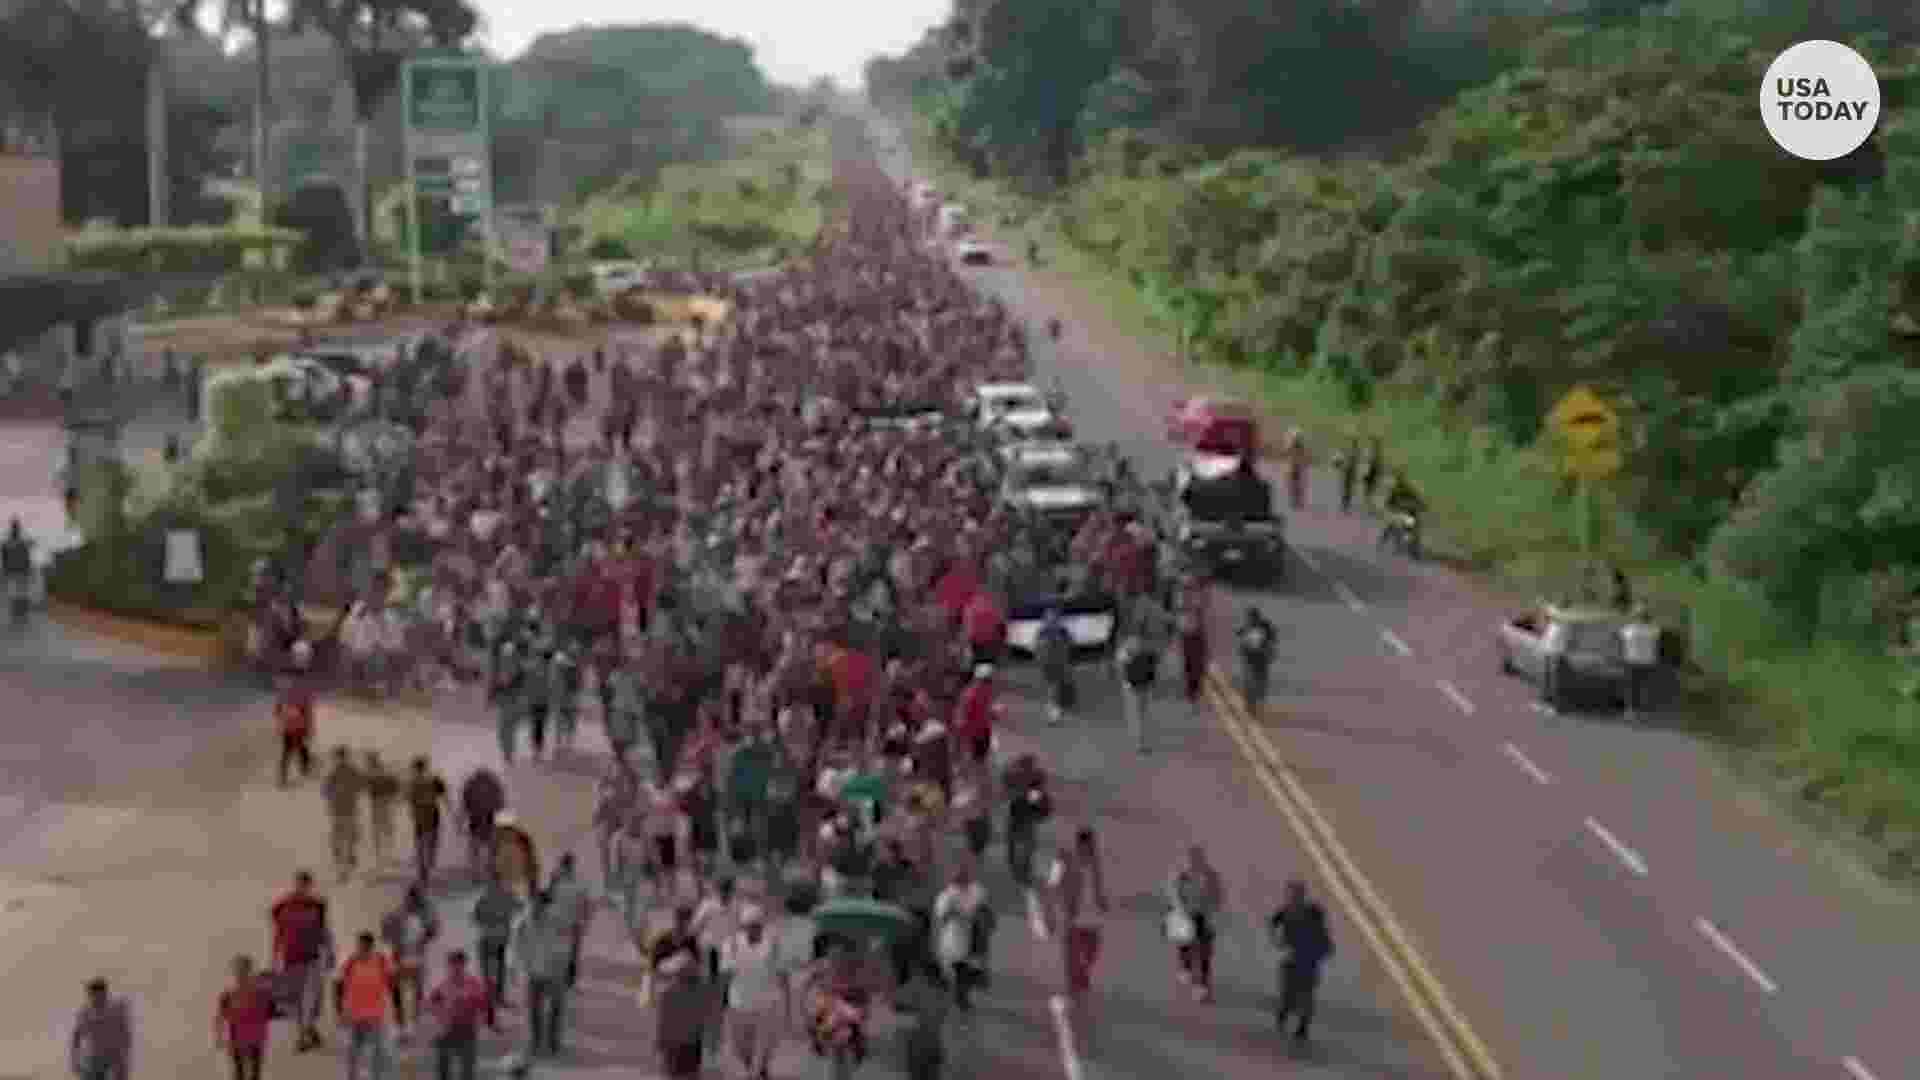 Caravan Of Central American Migrants Grows In The Thousands